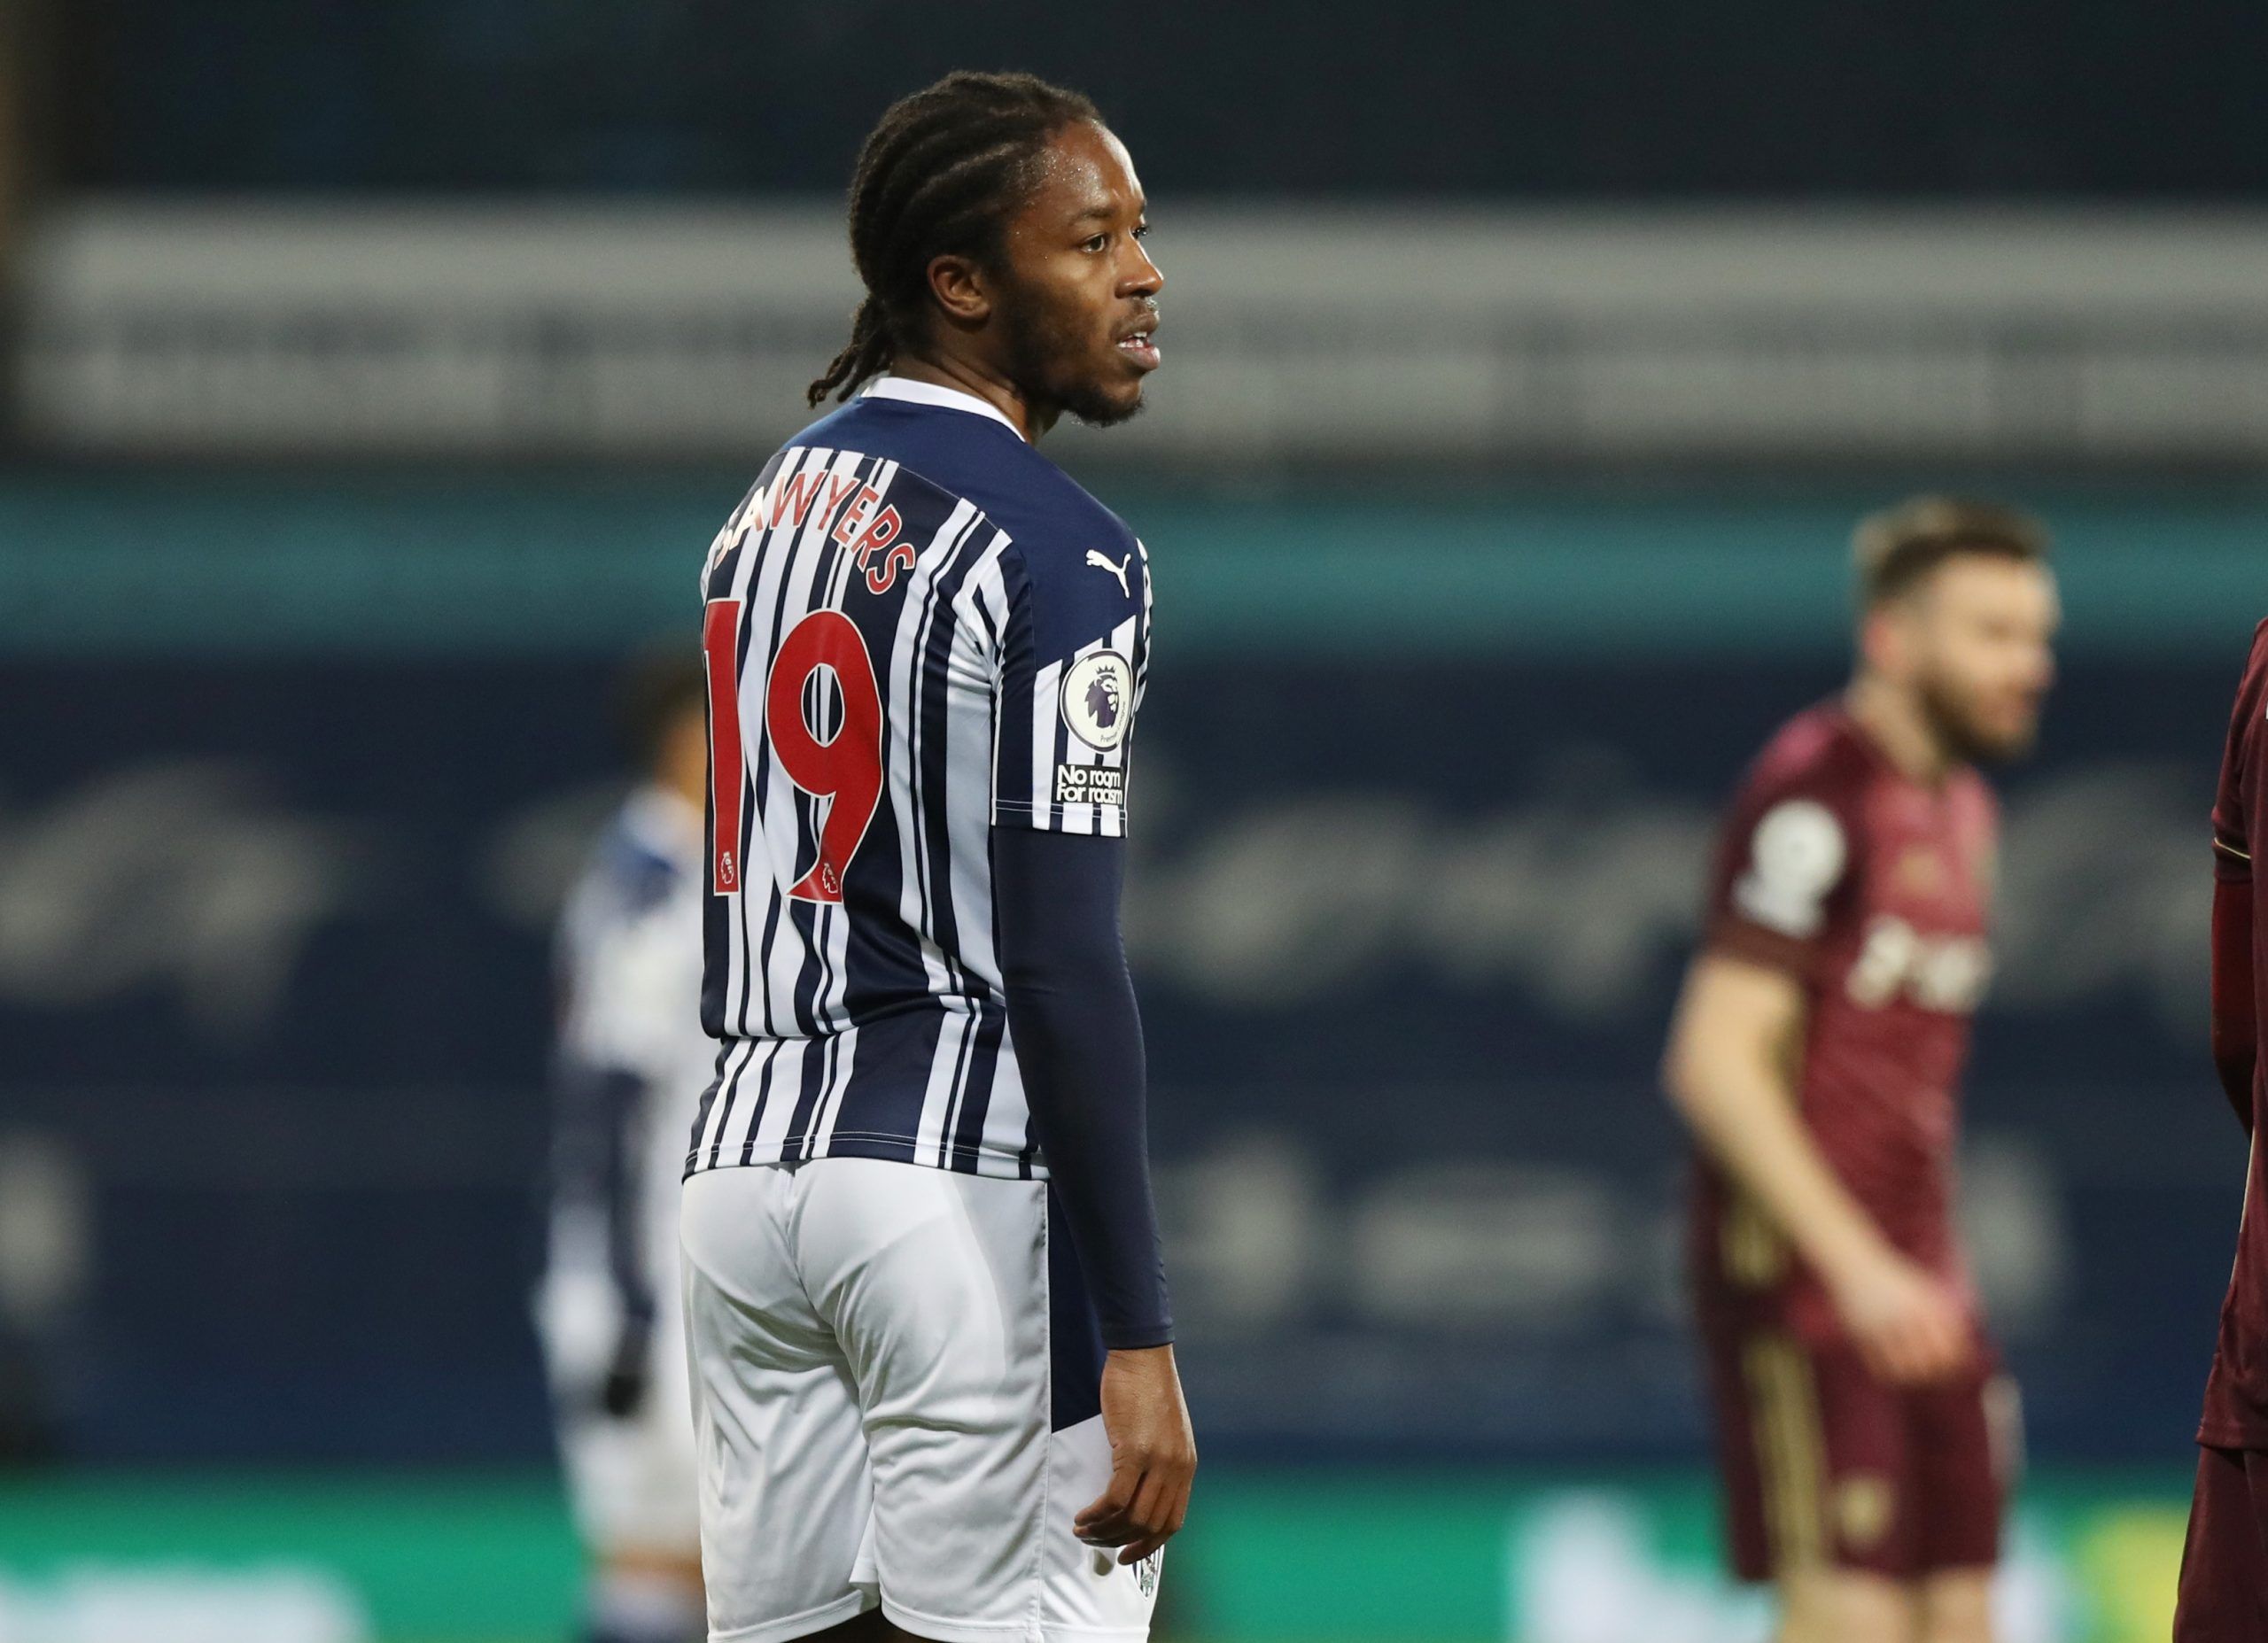 romaine-sawyers-west-bromwich-albion-steve-bruce-west-brom-transfer-news-stoke-city-free-agentSoccer Football - Premier League - West Bromwich Albion v Leeds United - The Hawthorns, West Bromwich, Britain - December 29, 2020 West Bromwich Albion's Romaine Sawyers looks dejected after scoring an own goal and Leeds United's first Pool via REUTERS/Dave Rogers EDITORIAL USE ONLY. No use with unauthorized audio, video, data, fixture lists, club/league logos or 'live' services. Online in-match use lim